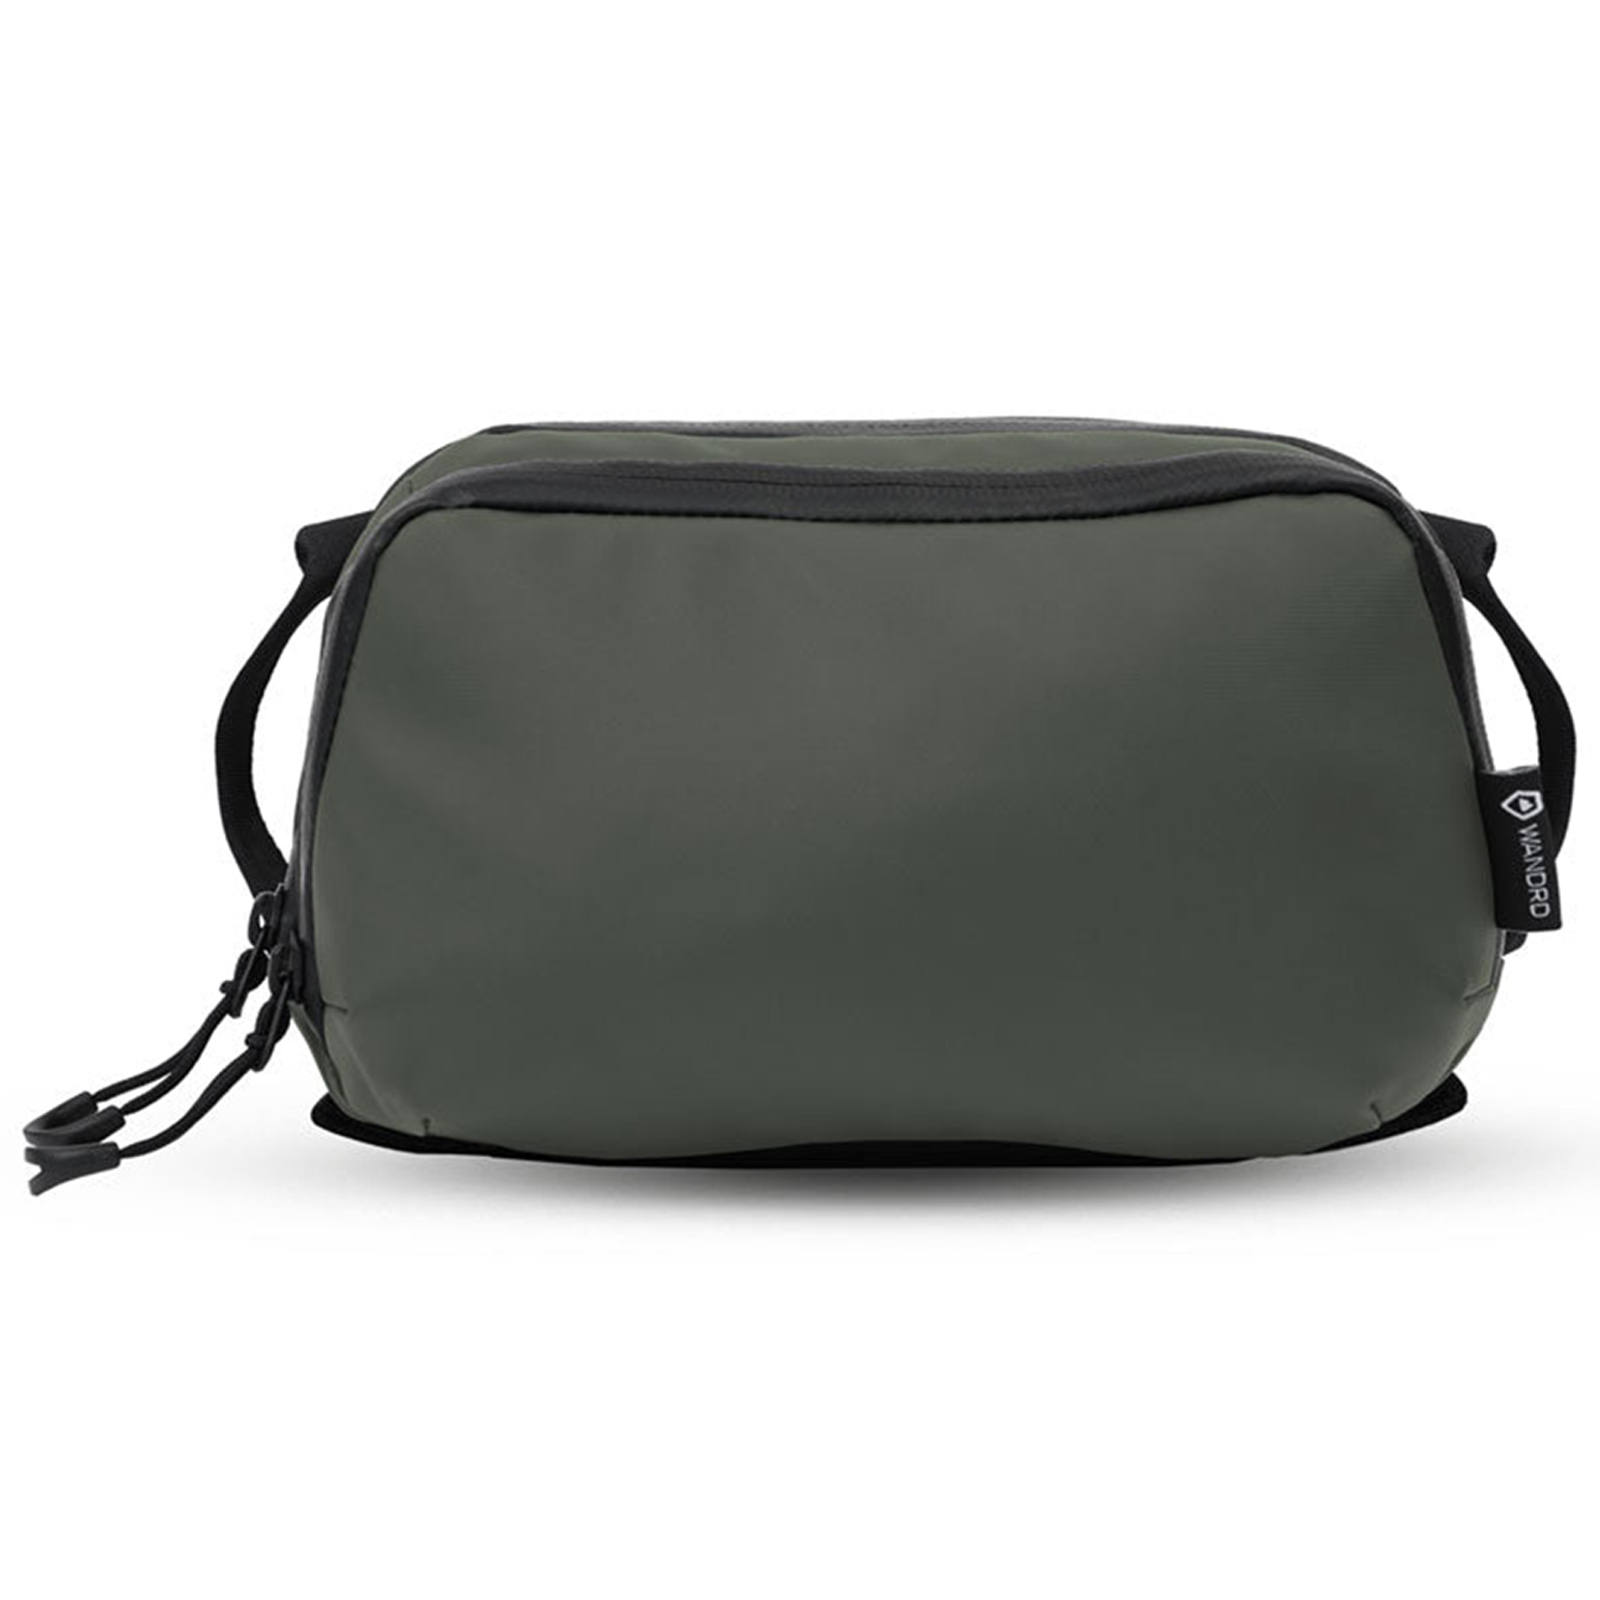 Image of WANDRD Tech Bag Large Wasatch Green